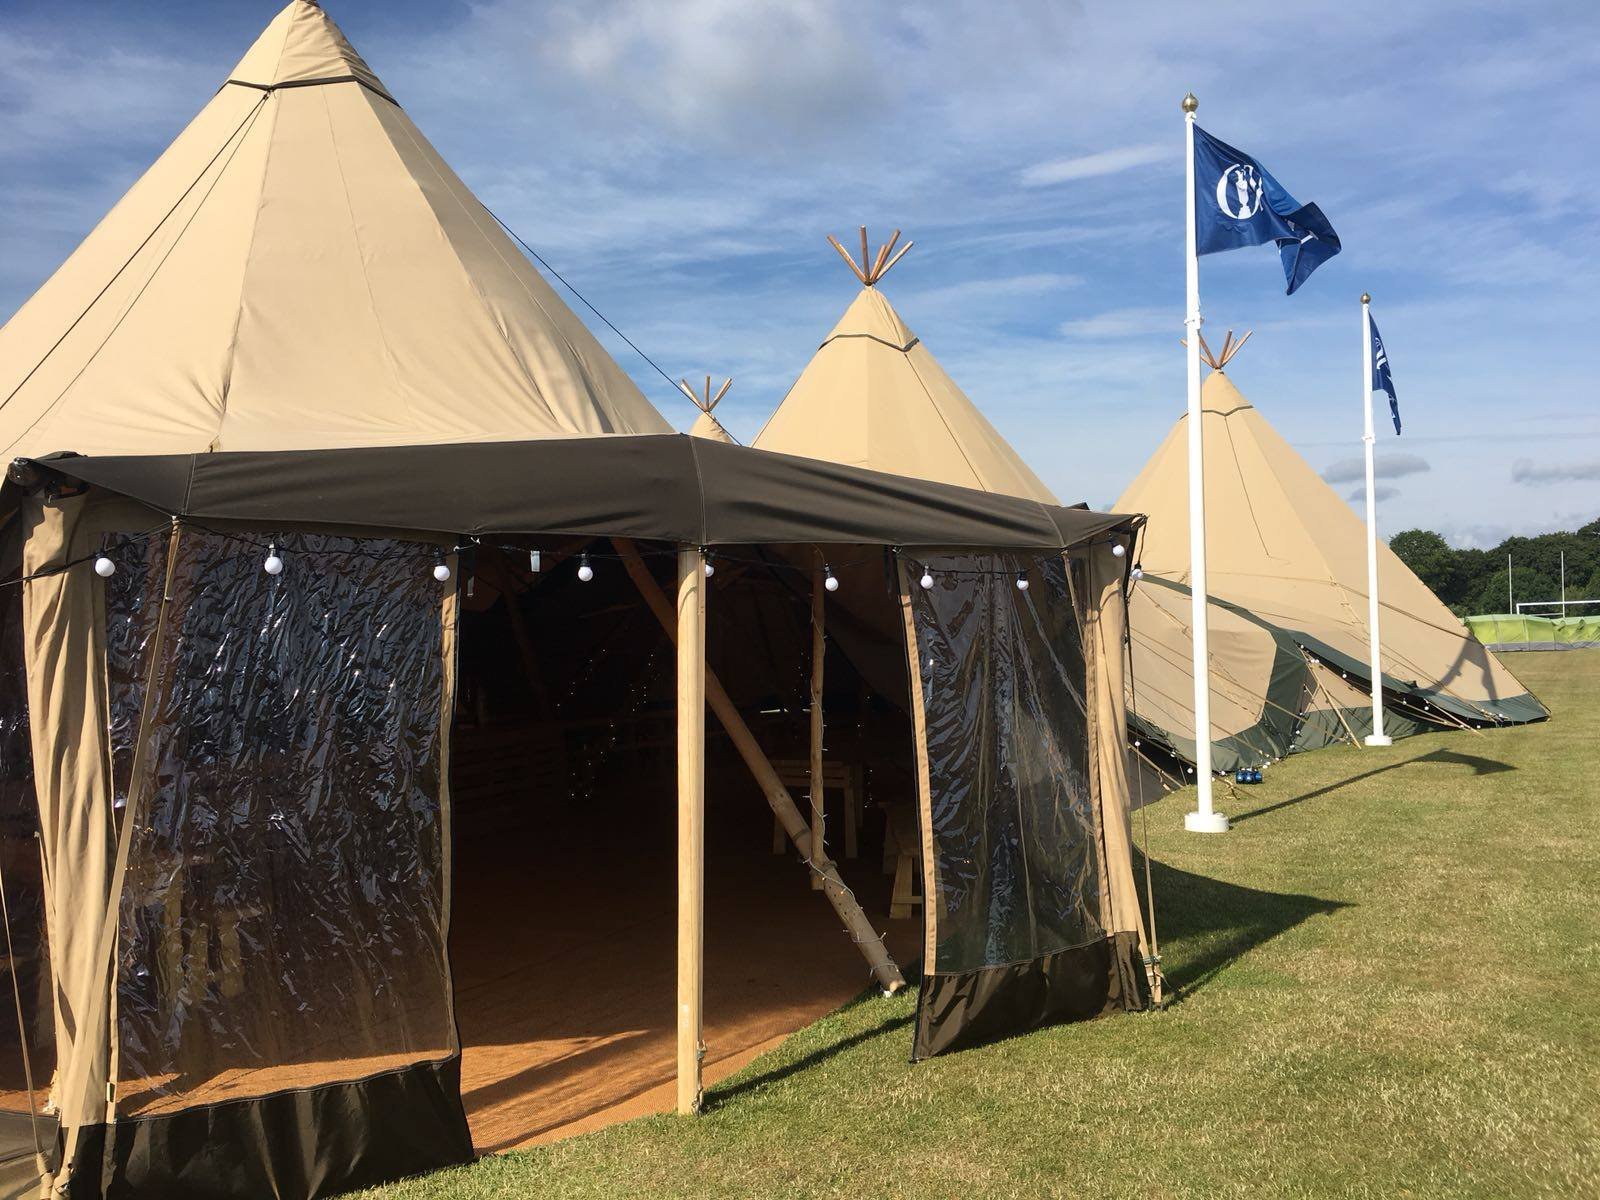 Welcoming entrance to the Giant Tipis Clubhouse at The Open Camping Village 2018